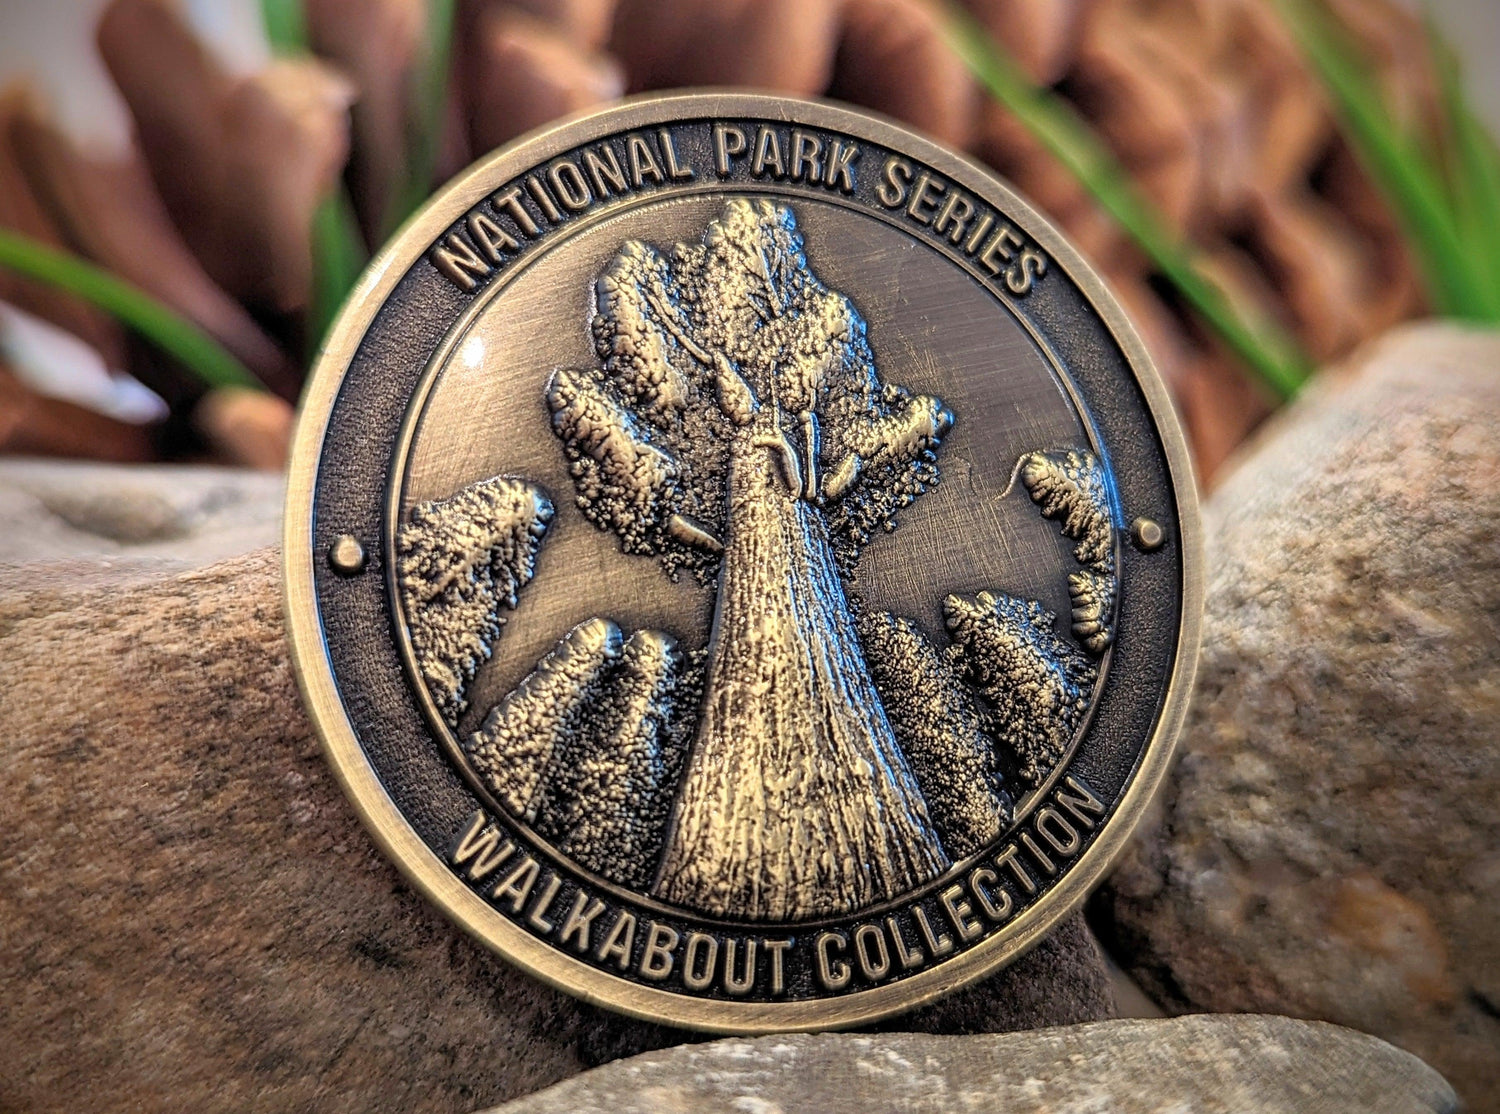 SEQUOIA NATIONAL PARK CHALLENGE COIN